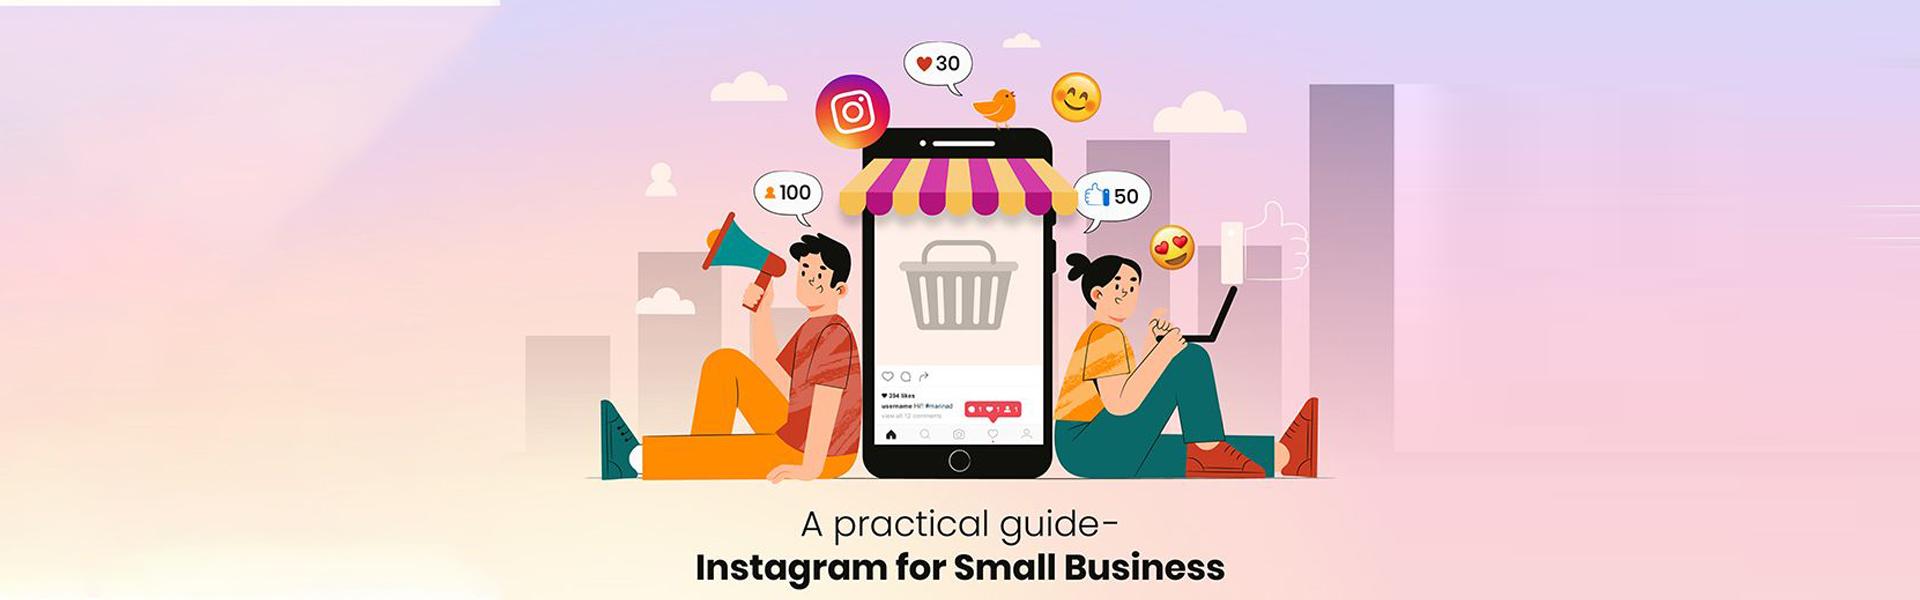 Instagram for Small Business 